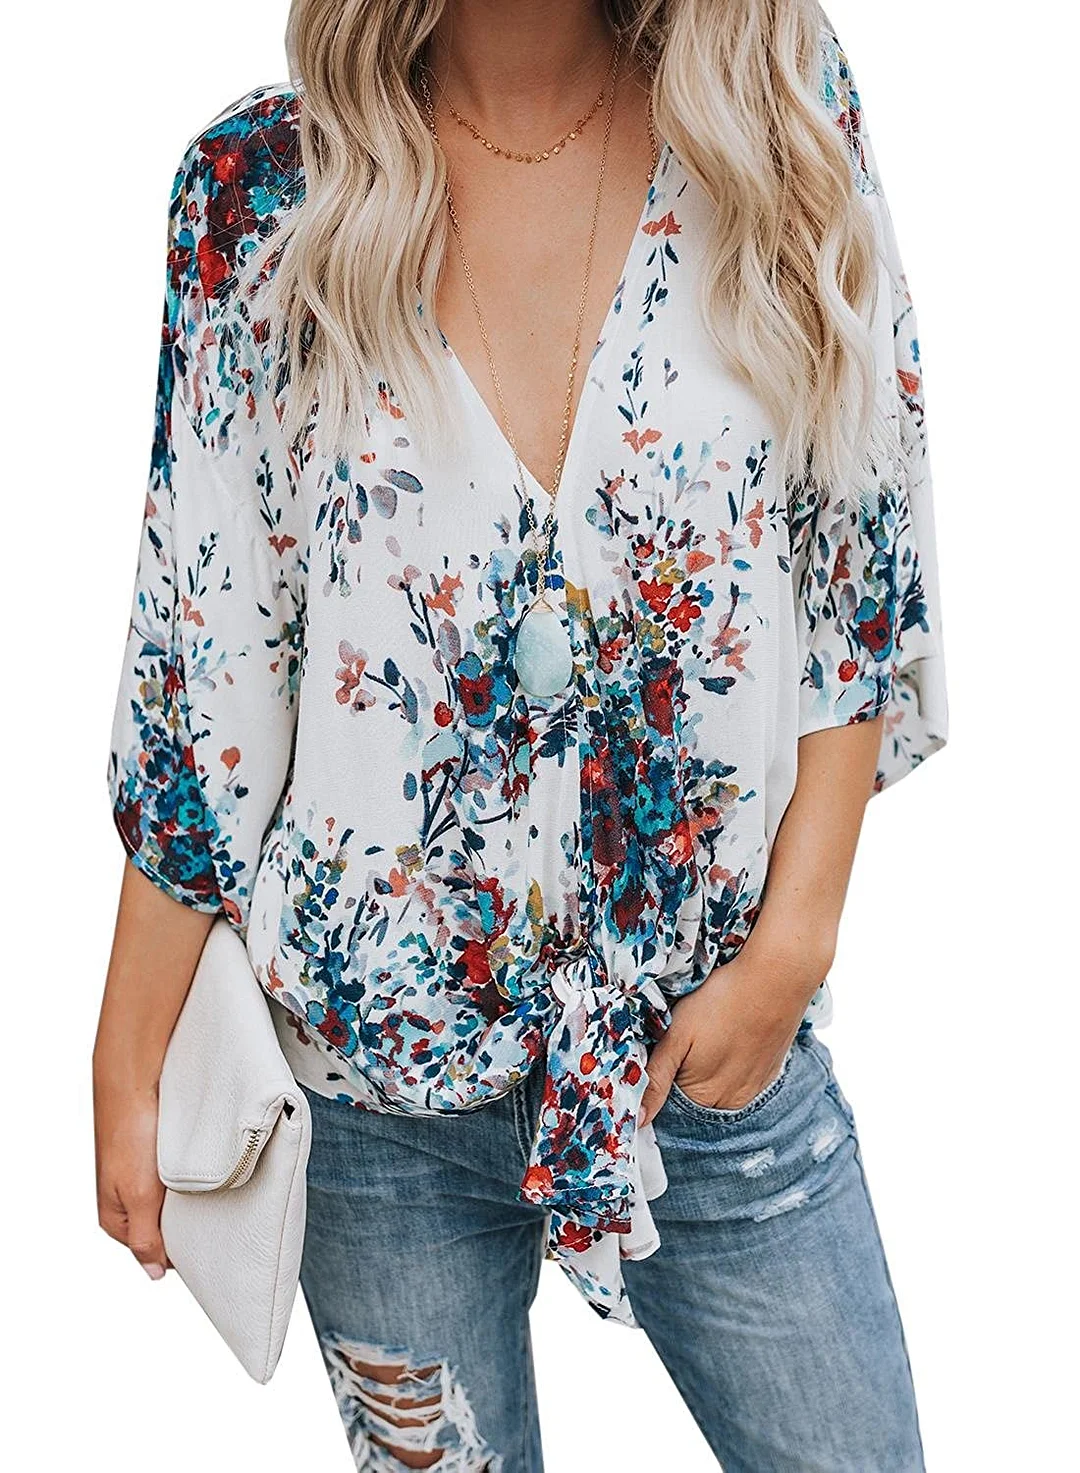 Womens Floral Blouses Summer Short Bat Sleeve Tie Front Tops Loose Fitting Shirts